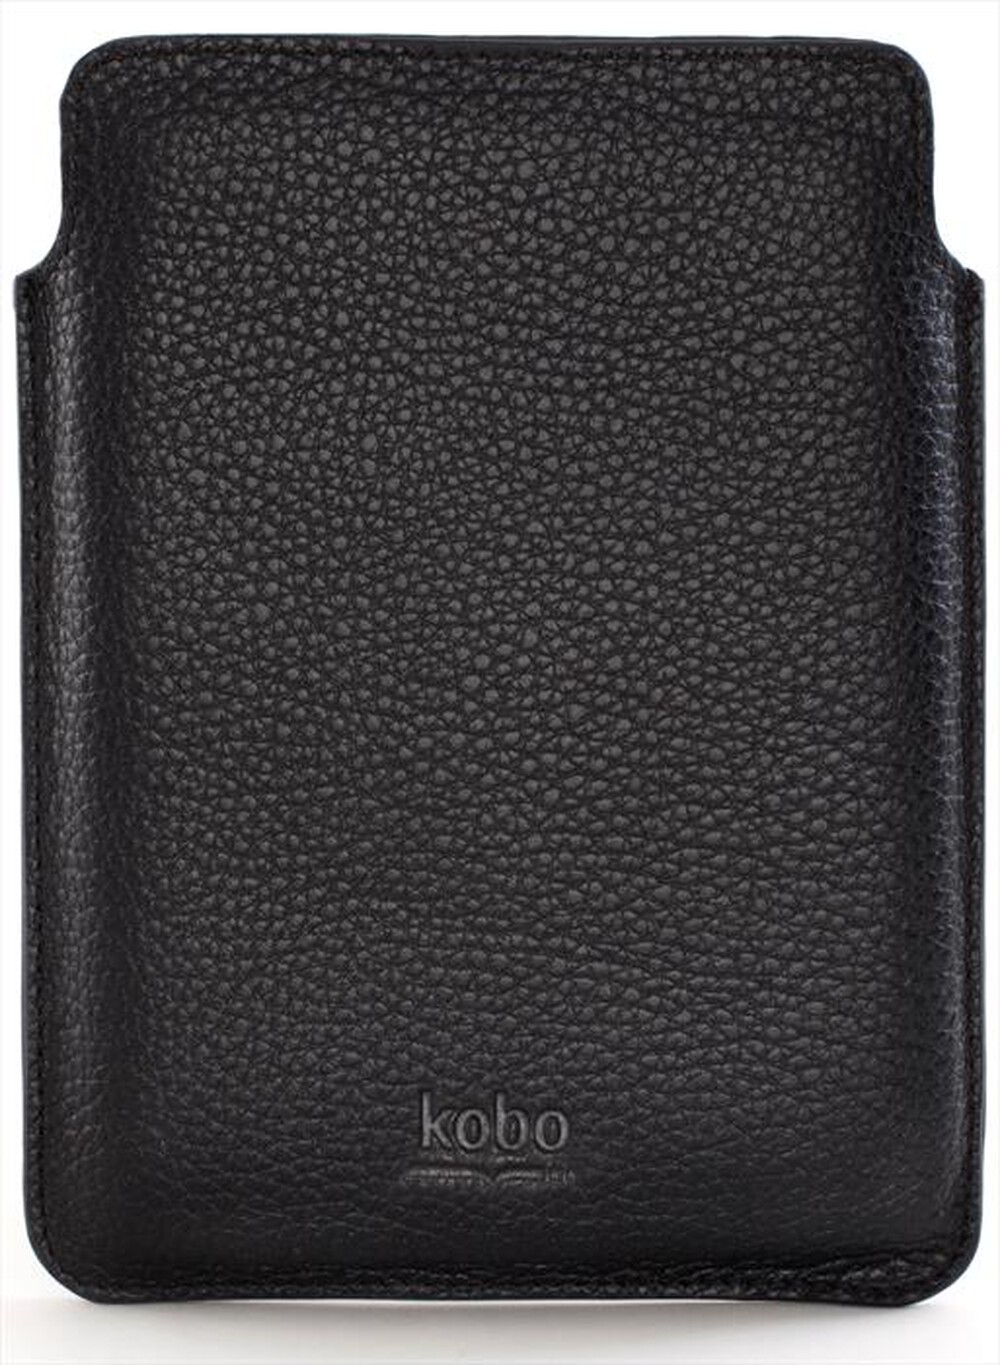 "KOBO - Touch Top Leather - Nero"